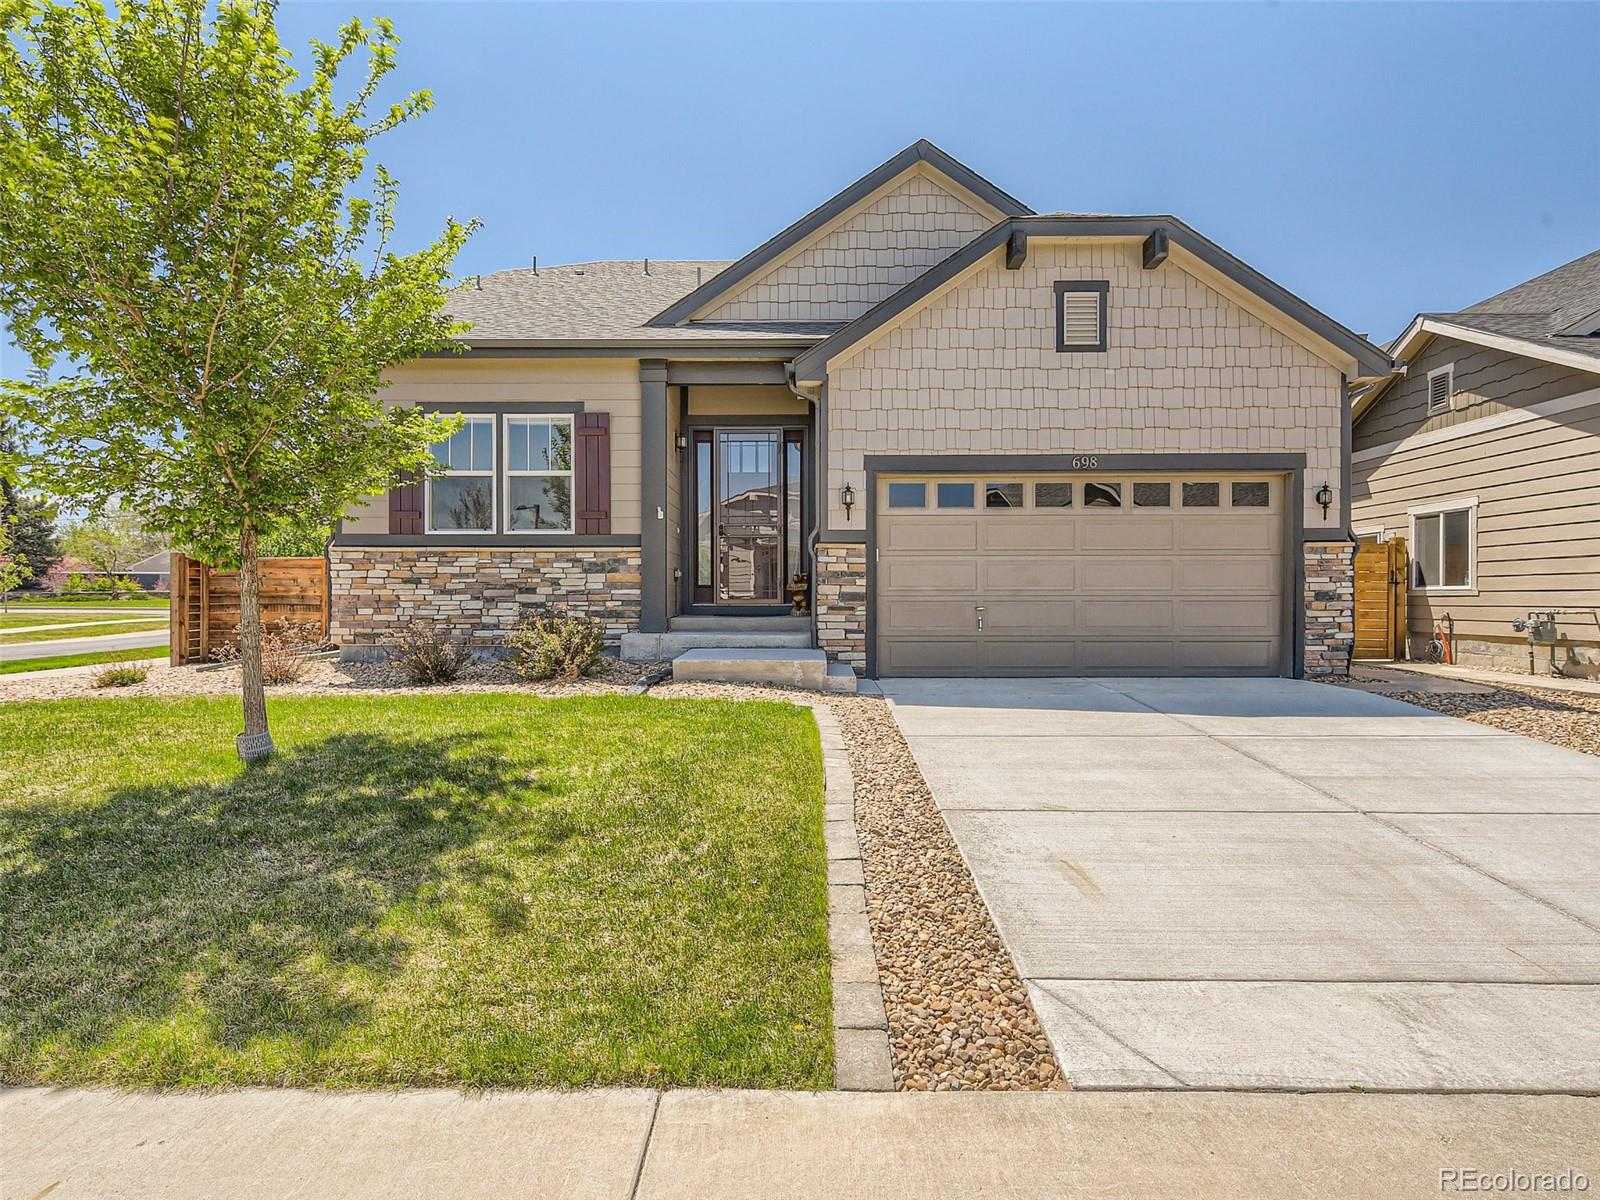 698 e dry creek circle, littleton sold home. Closed on 2024-04-26 for $800,000.